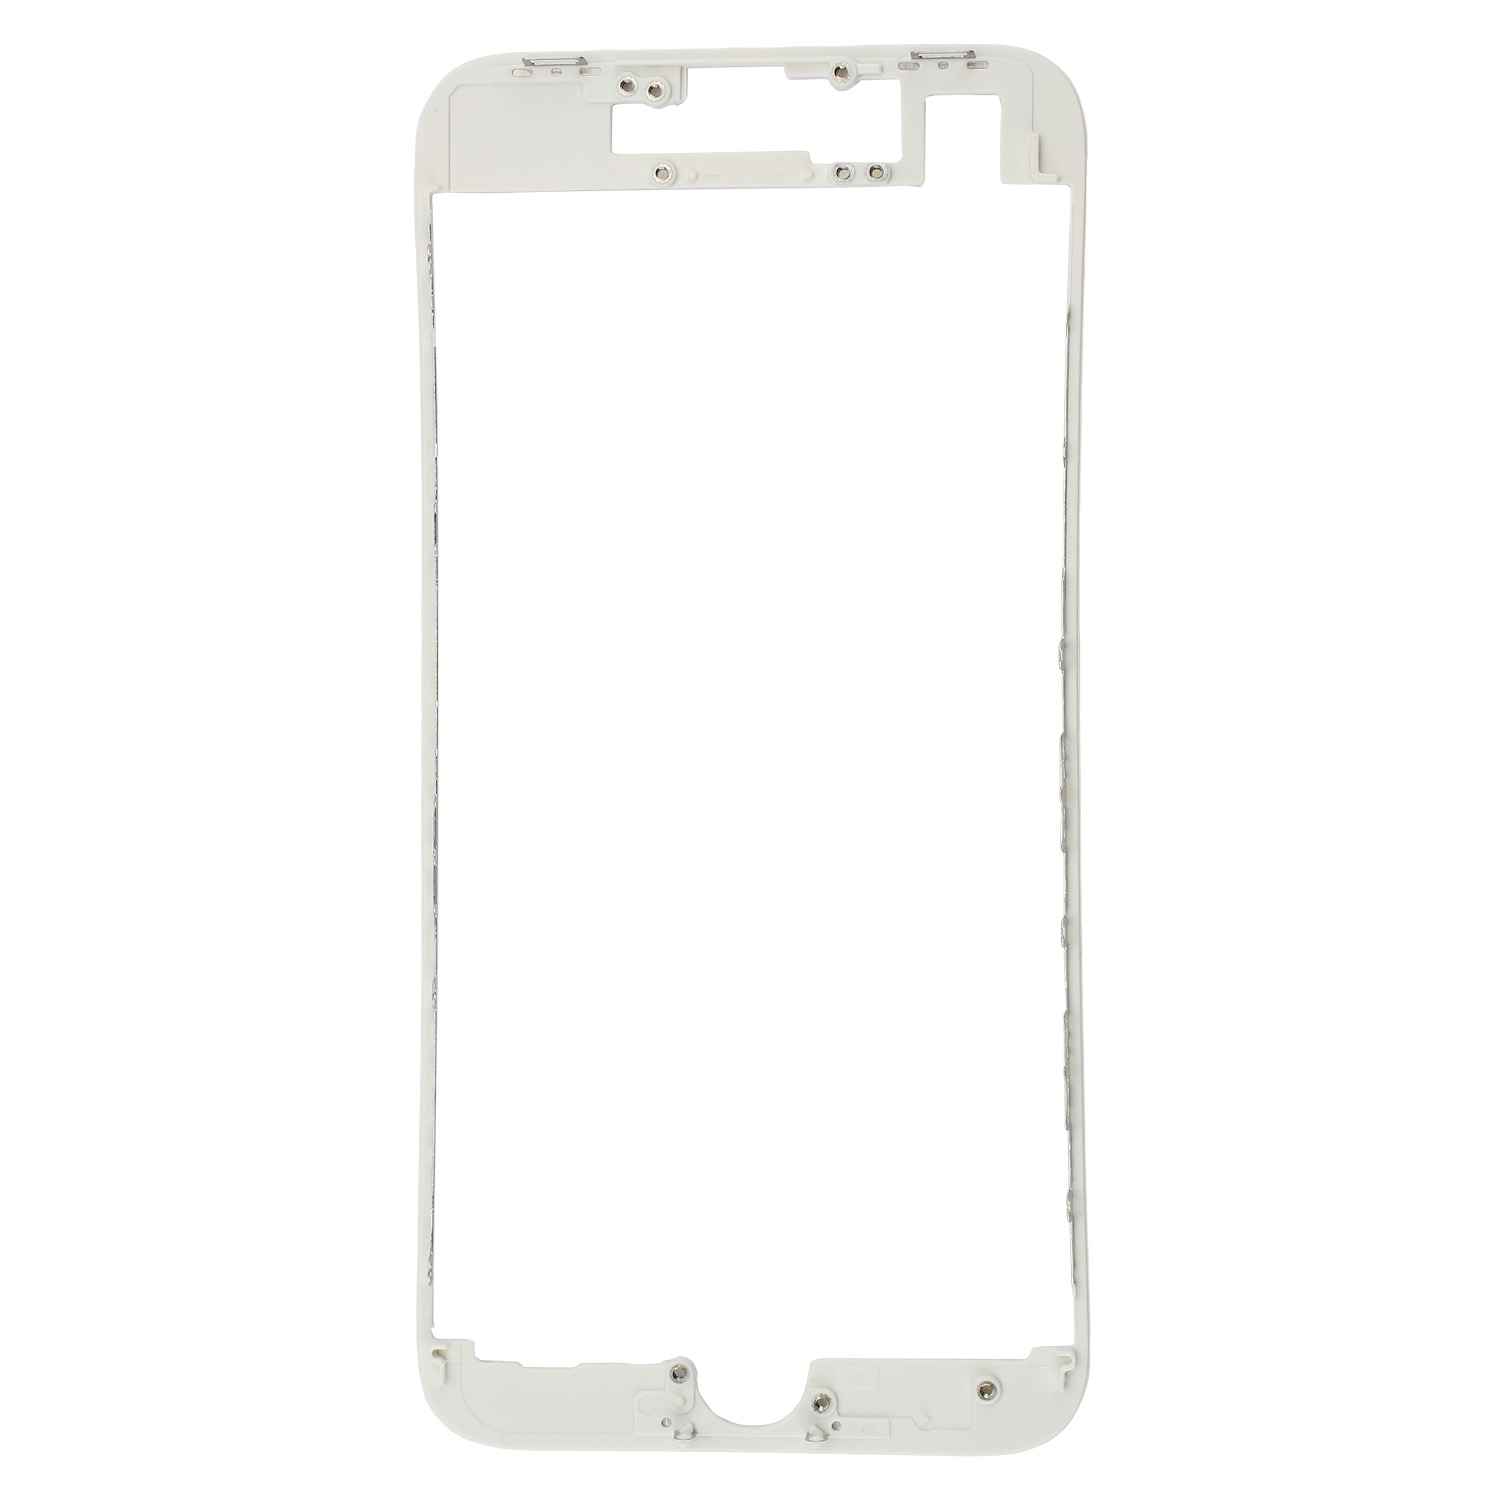 Front Frame with Hot glue, compatible with iPhone 8/SE2 (2020), White